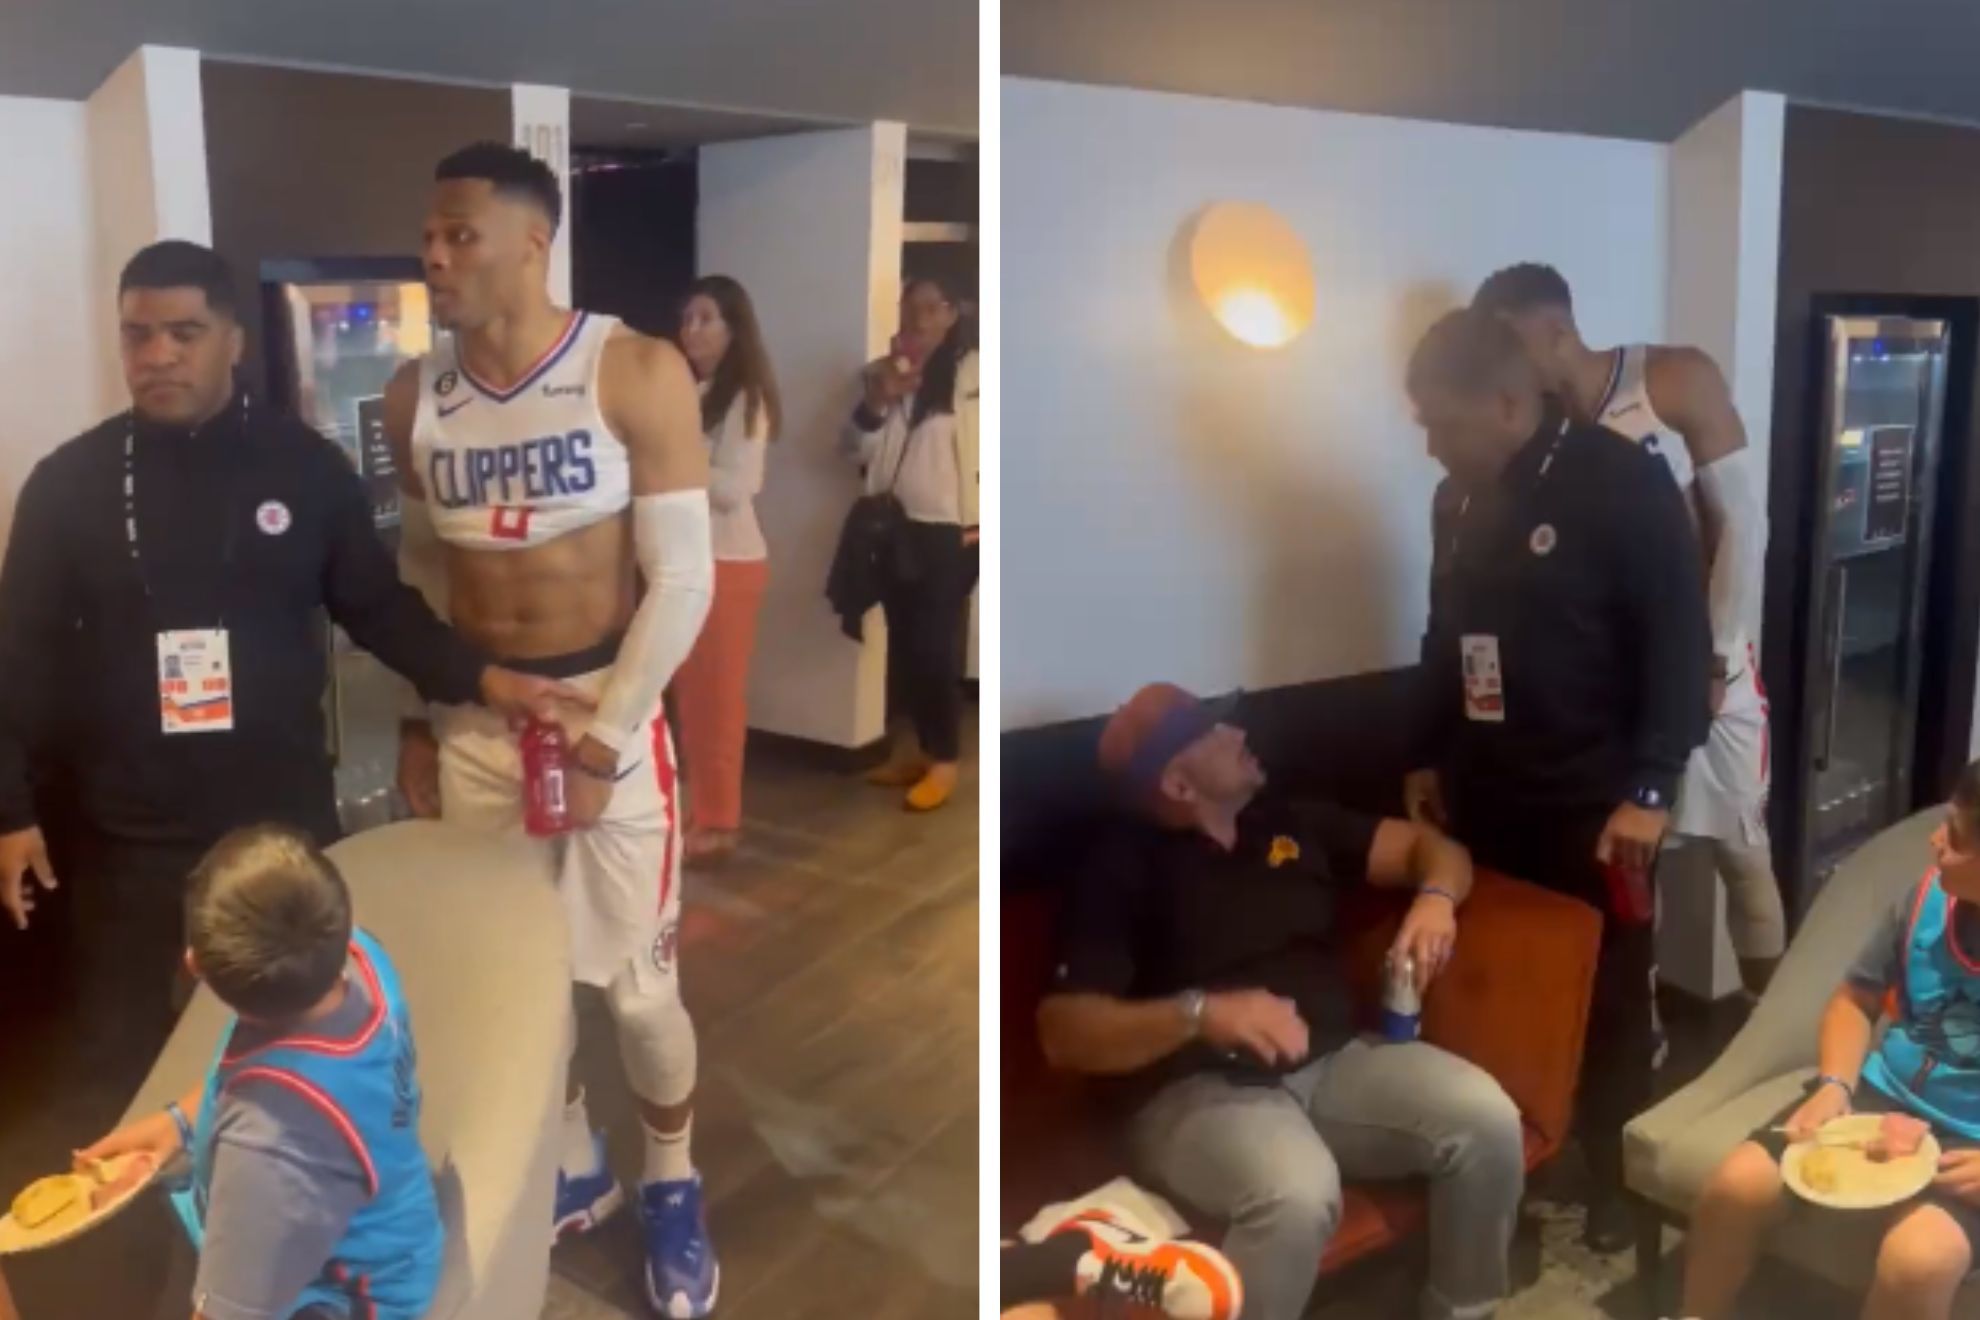 Russell Westbrook squares up to Suns fan in front of child after Clippers win